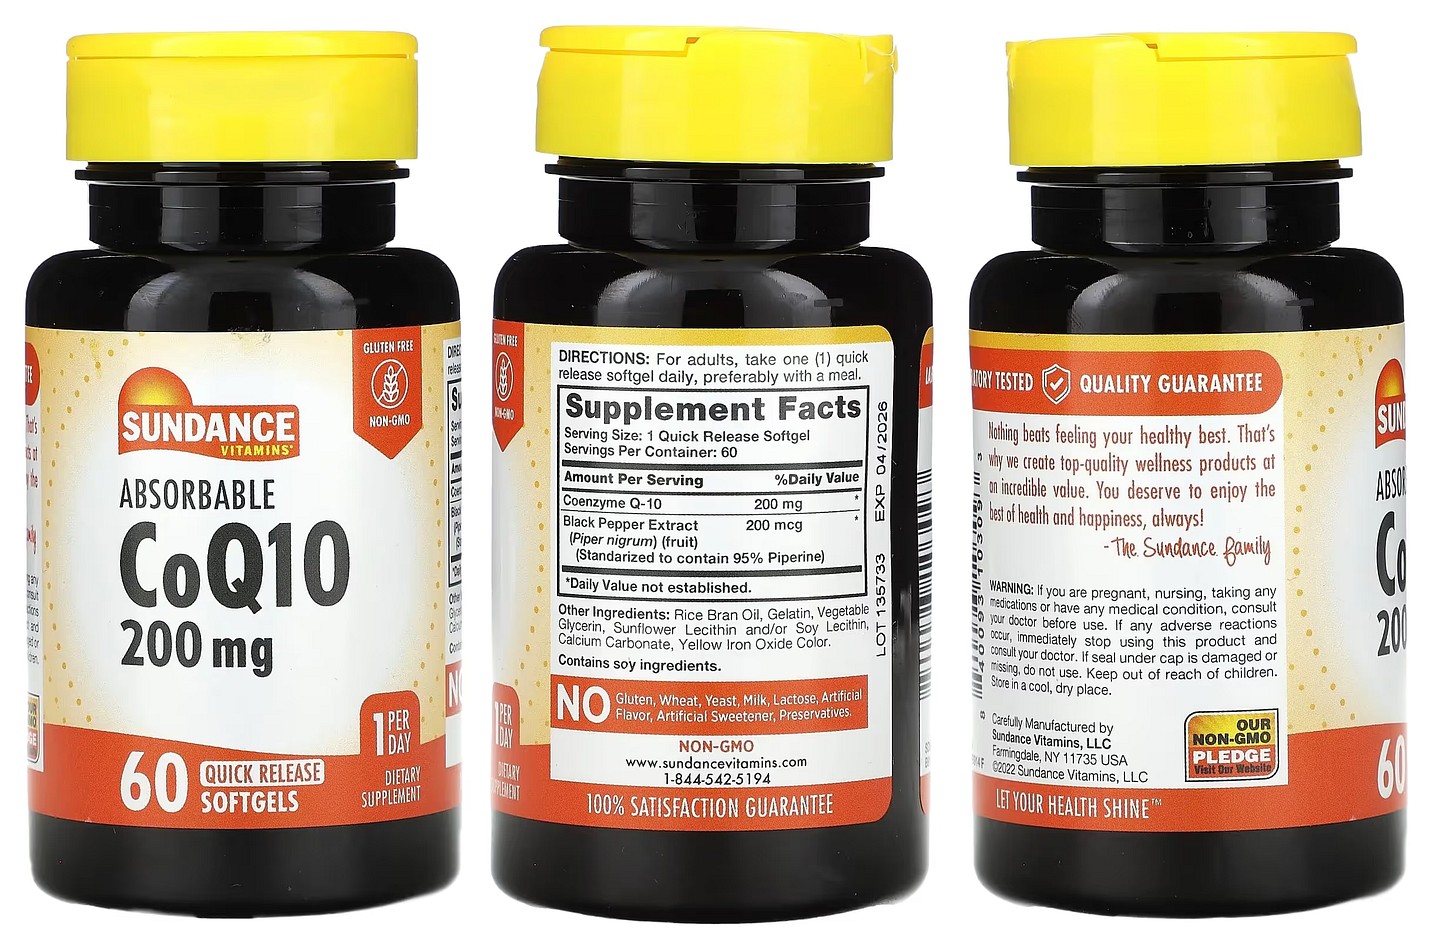 Sundance Vitamins, Absorbable CoQ10 packaging